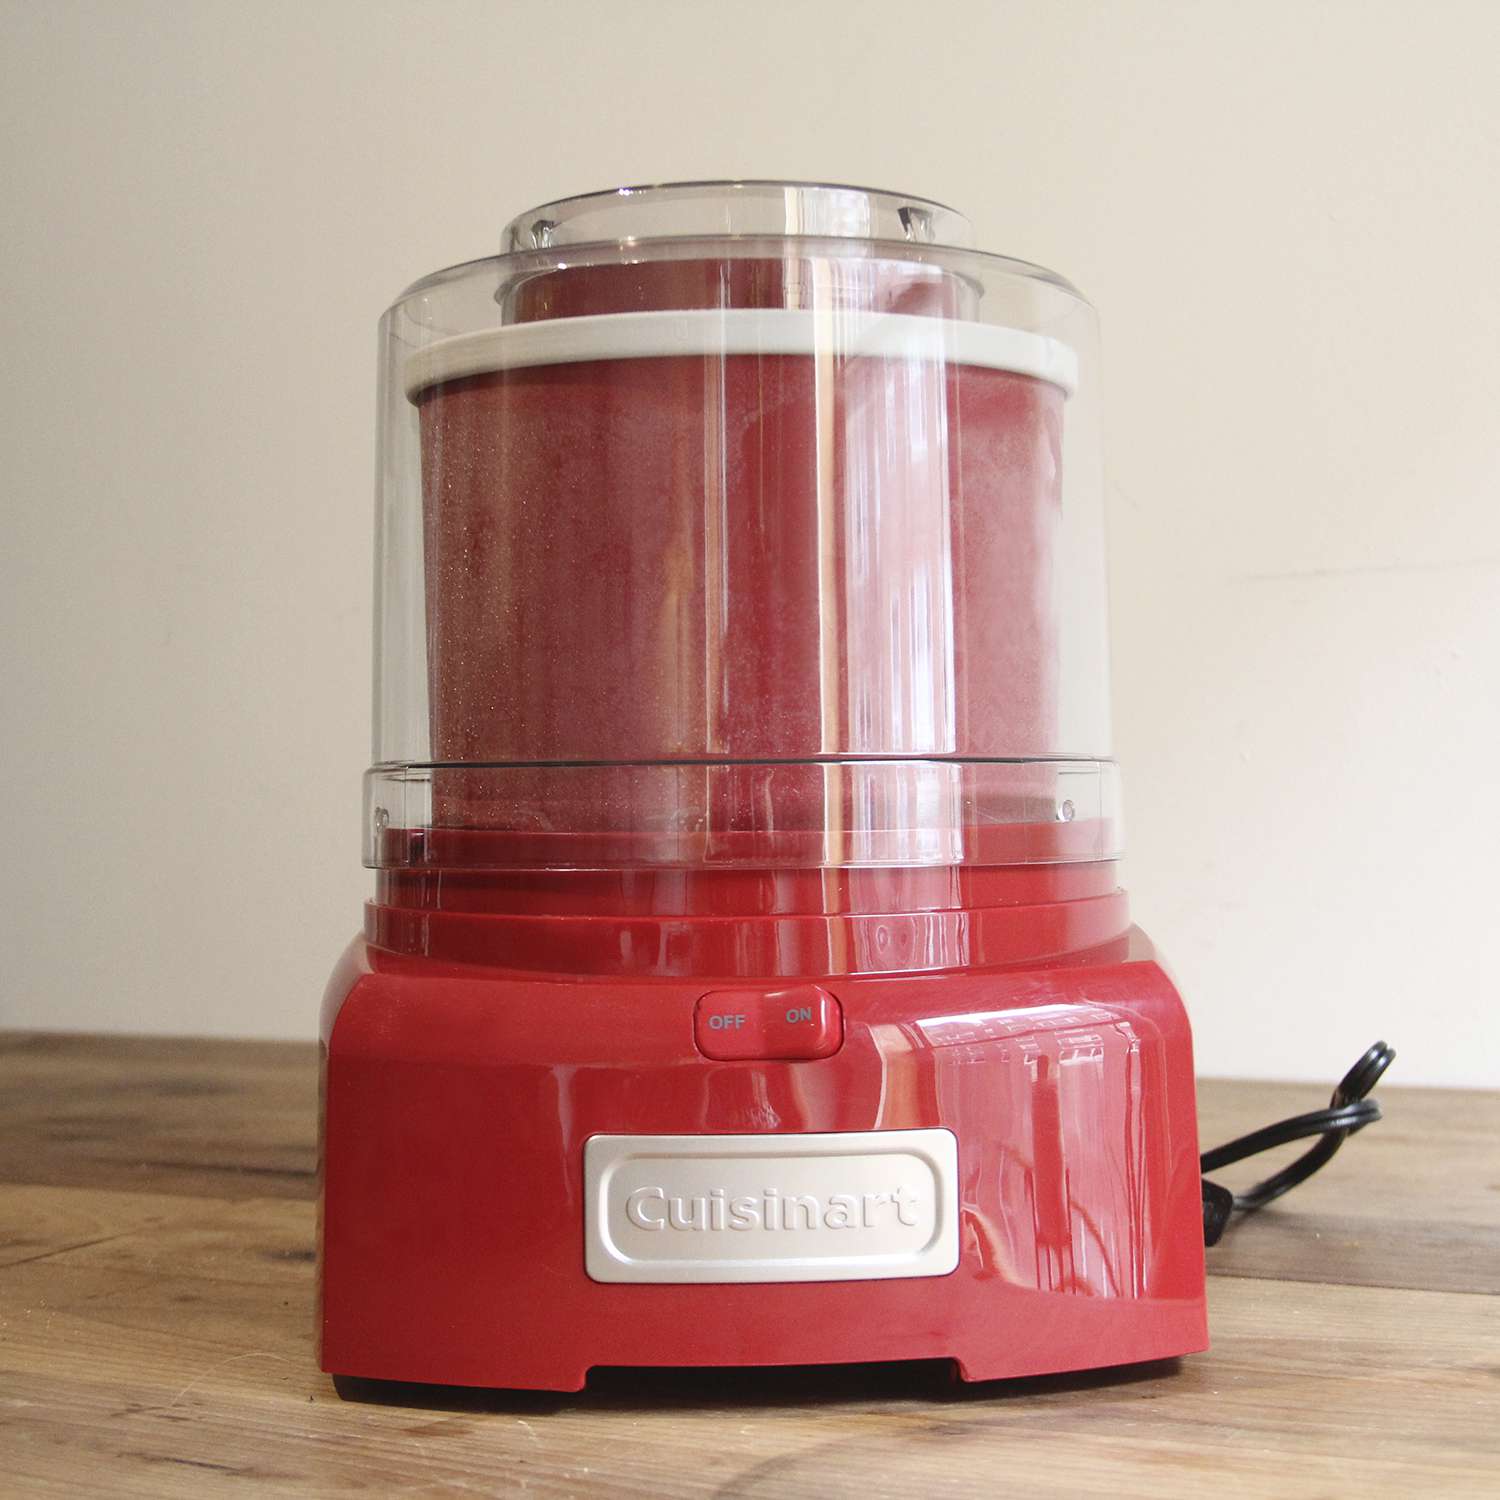 What Are The Freezing Time Requirements For A Cuisinart Ice Cream Maker Bowl